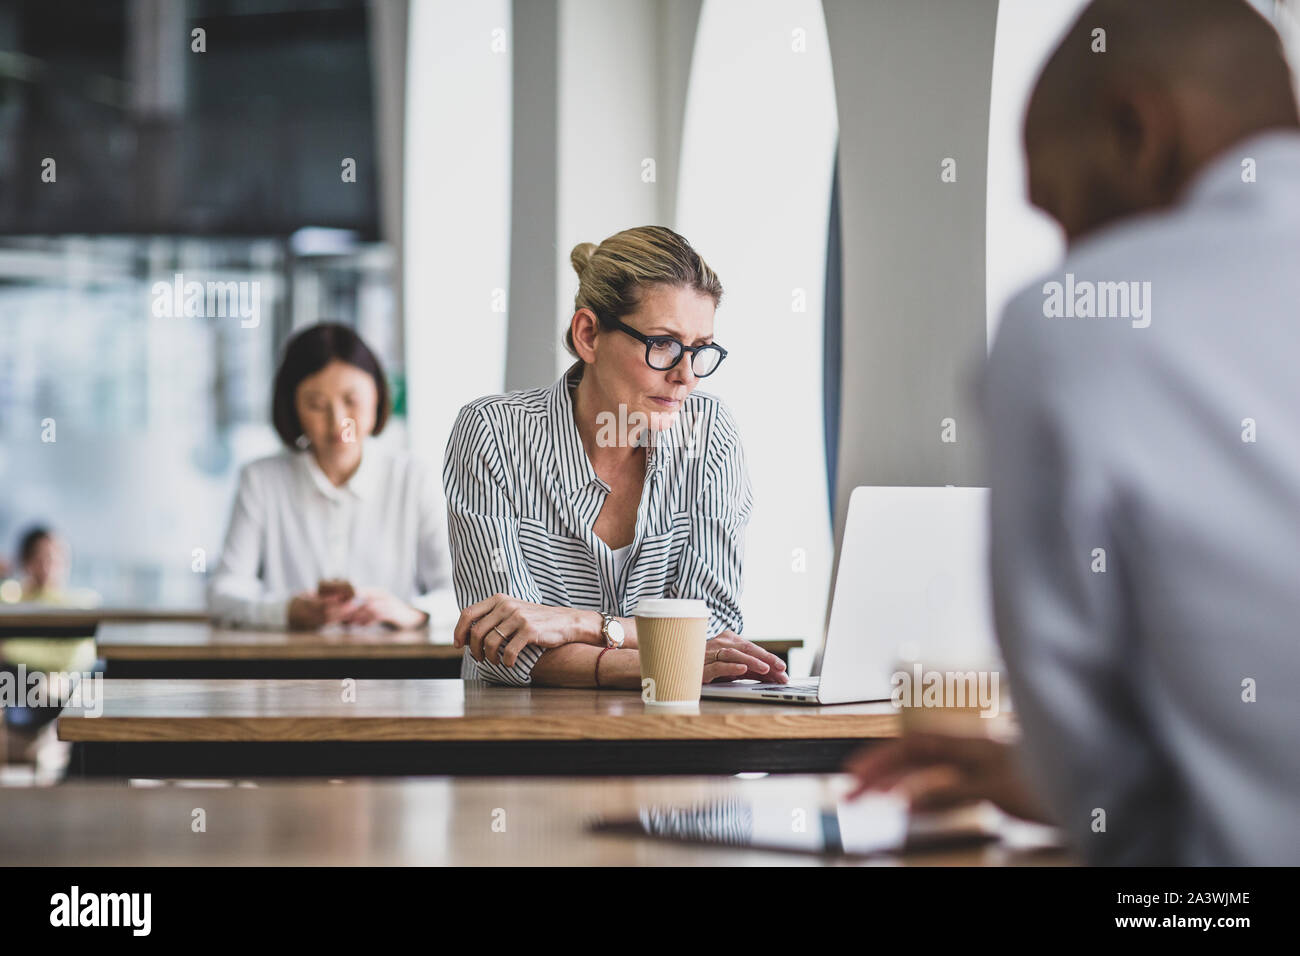 Businesswoman in a cafÃ© using a laptop Stock Photo